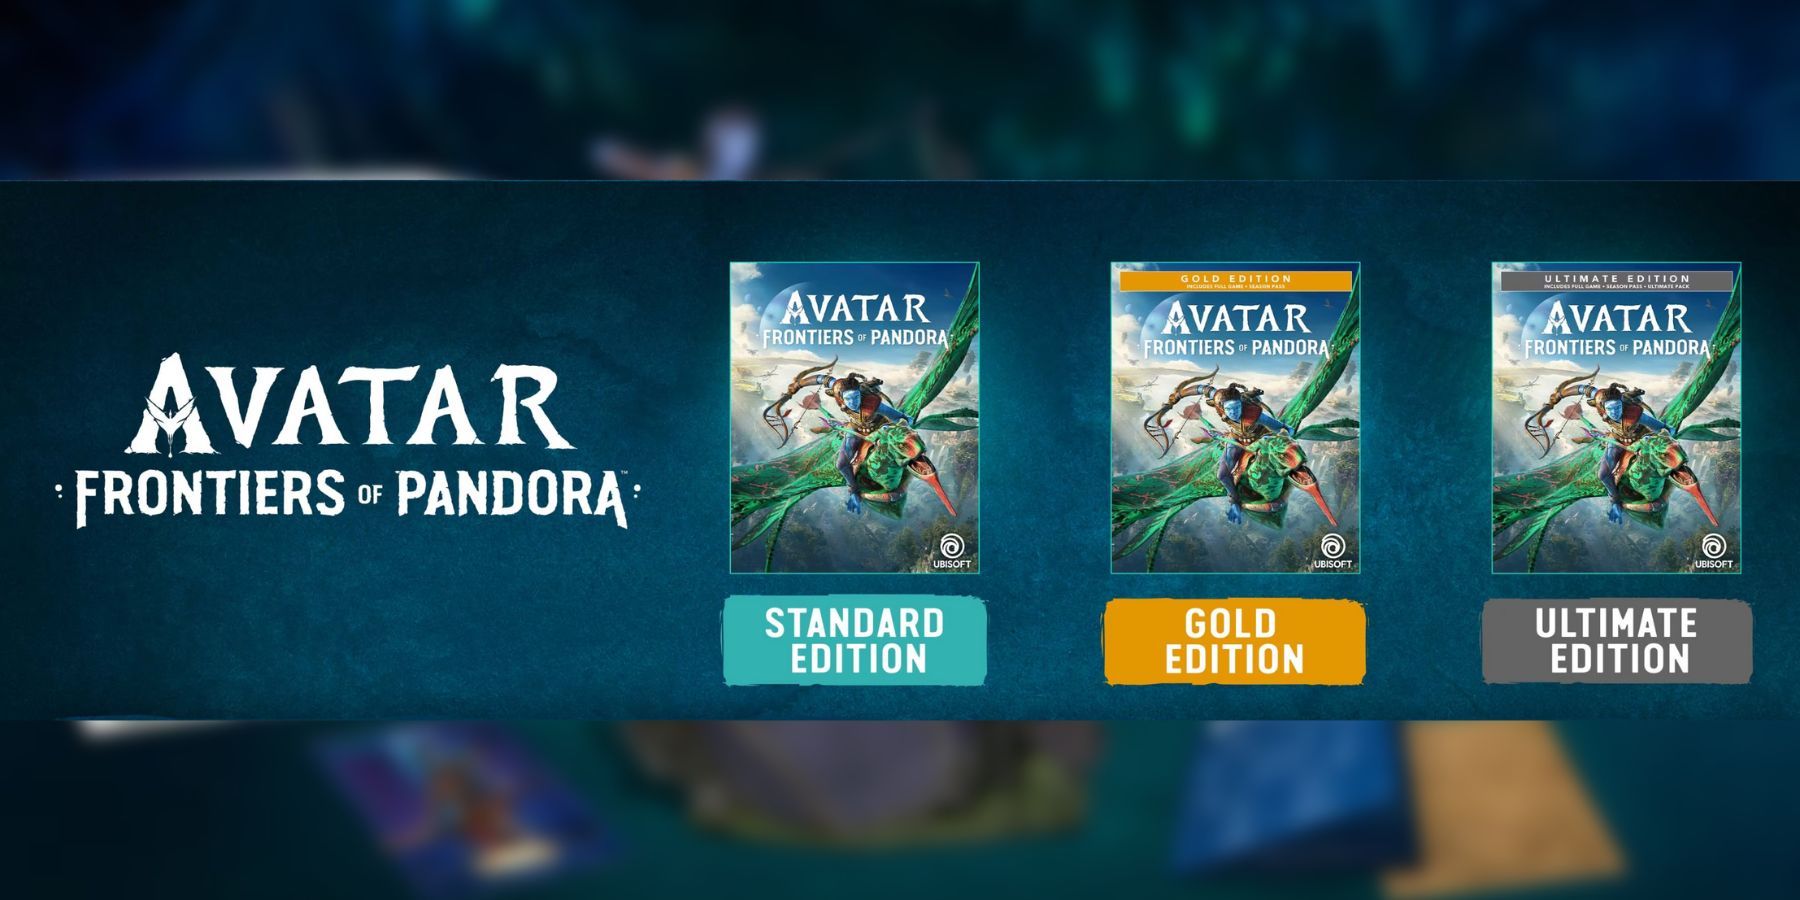 PS5 Avatar: Frontiers of Pandora Gold Edition